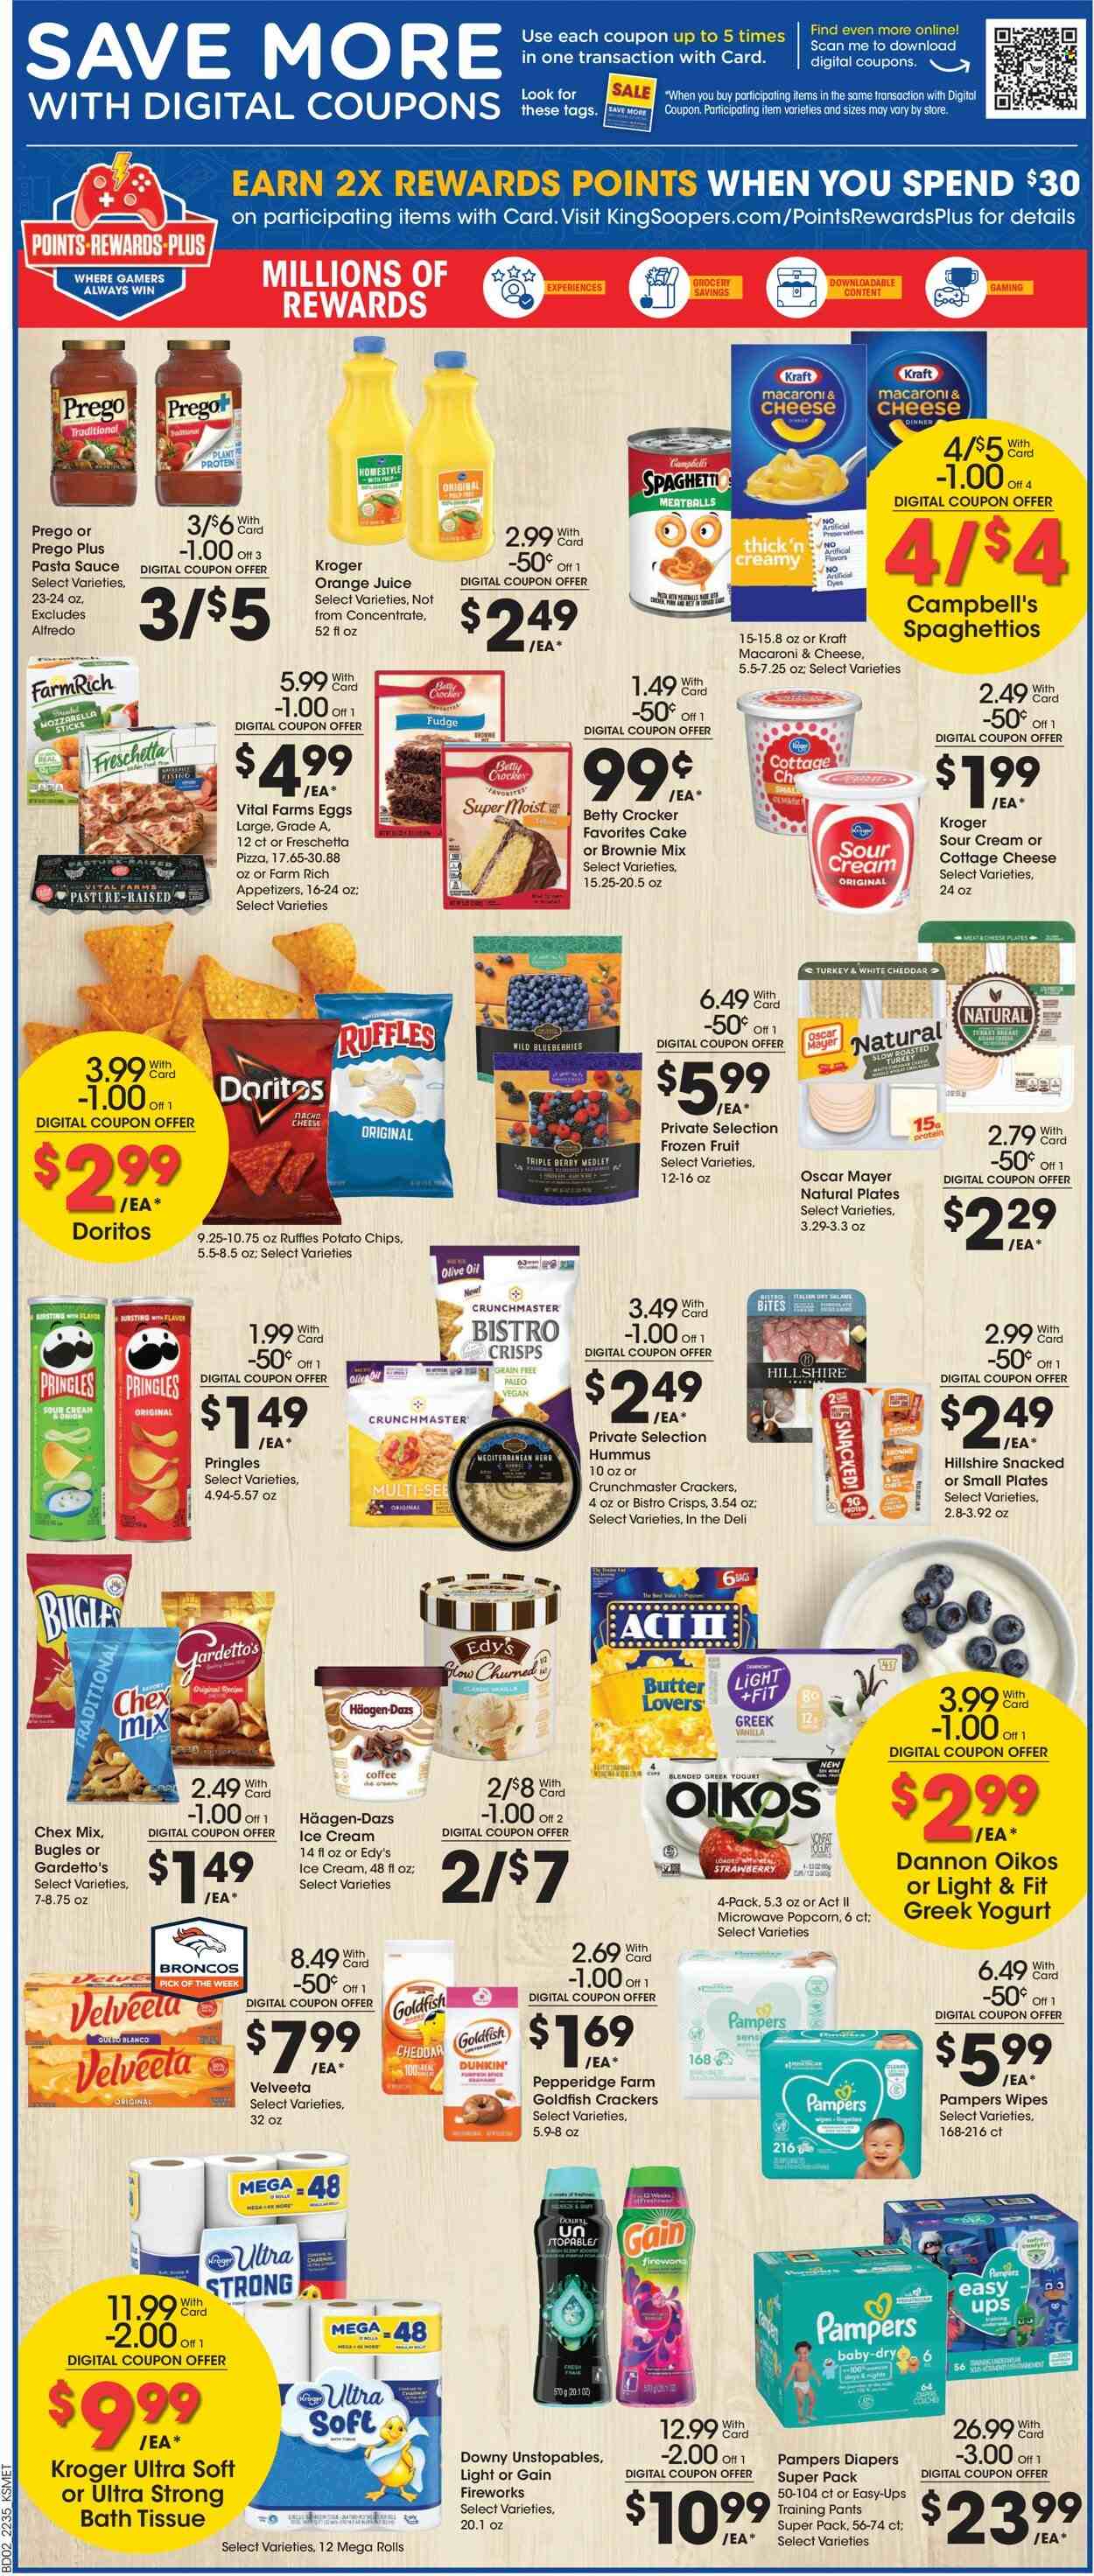 thumbnail - King Soopers Flyer - 09/28/2022 - 10/04/2022 - Sales products - cake, brownie mix, blueberries, Campbell's, macaroni & cheese, spaghetti, pizza, pasta sauce, meatballs, sauce, Kraft®, Oscar Mayer, hummus, cottage cheese, greek yoghurt, yoghurt, Oikos, Dannon, eggs, sour cream, ice cream, Häagen-Dazs, fudge, crackers, Doritos, potato chips, Pringles, popcorn, Goldfish, Ruffles, Chex Mix, plant protein, spice, olive oil, oil, orange juice, juice, coffee, turkey breast, wipes, Pampers, pants, nappies, baby pants, bath tissue, Gain, Unstopables, Gain Fireworks, bag. Page 3.